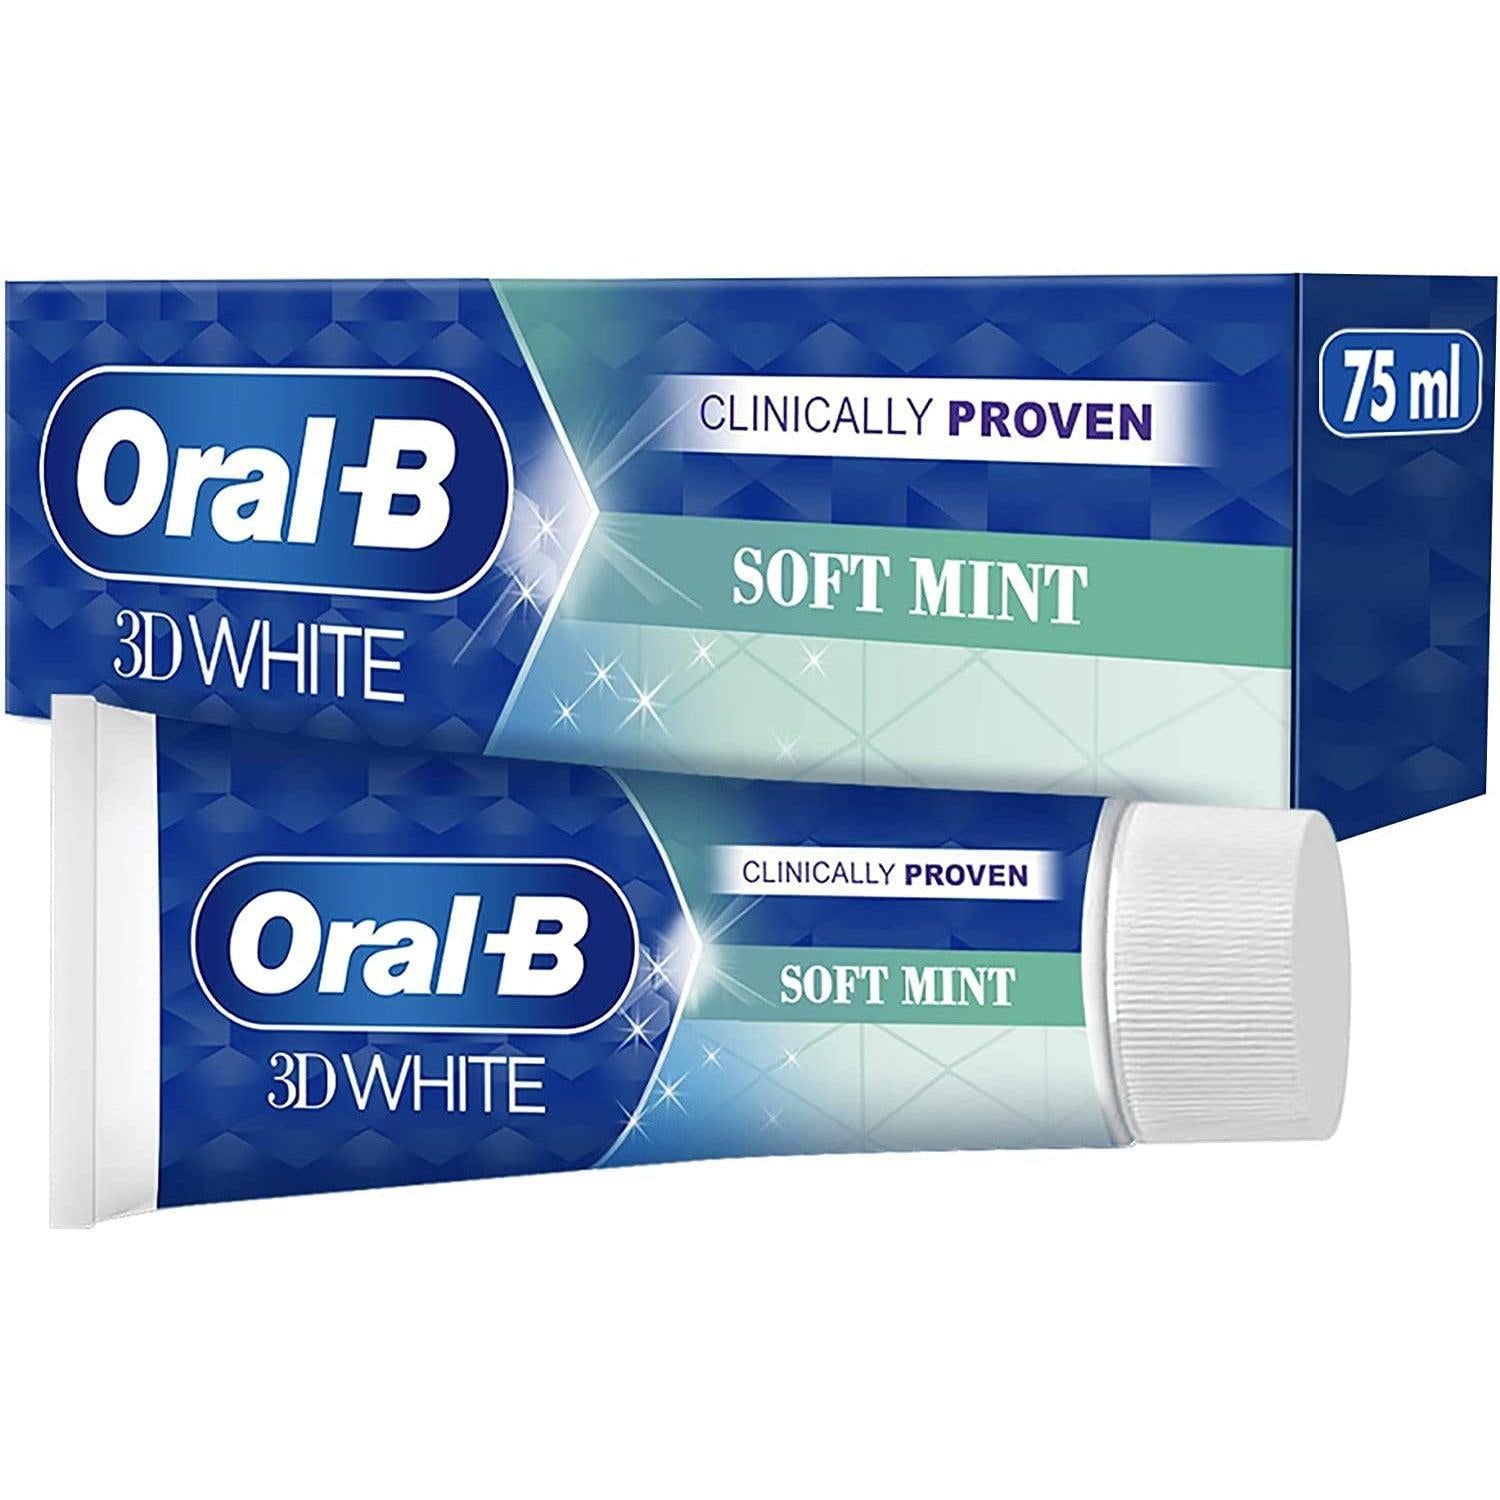 Oral-B 3D White Soft Mint Toothpaste, 75ml - Clinically Proven - Healthxpress.ie